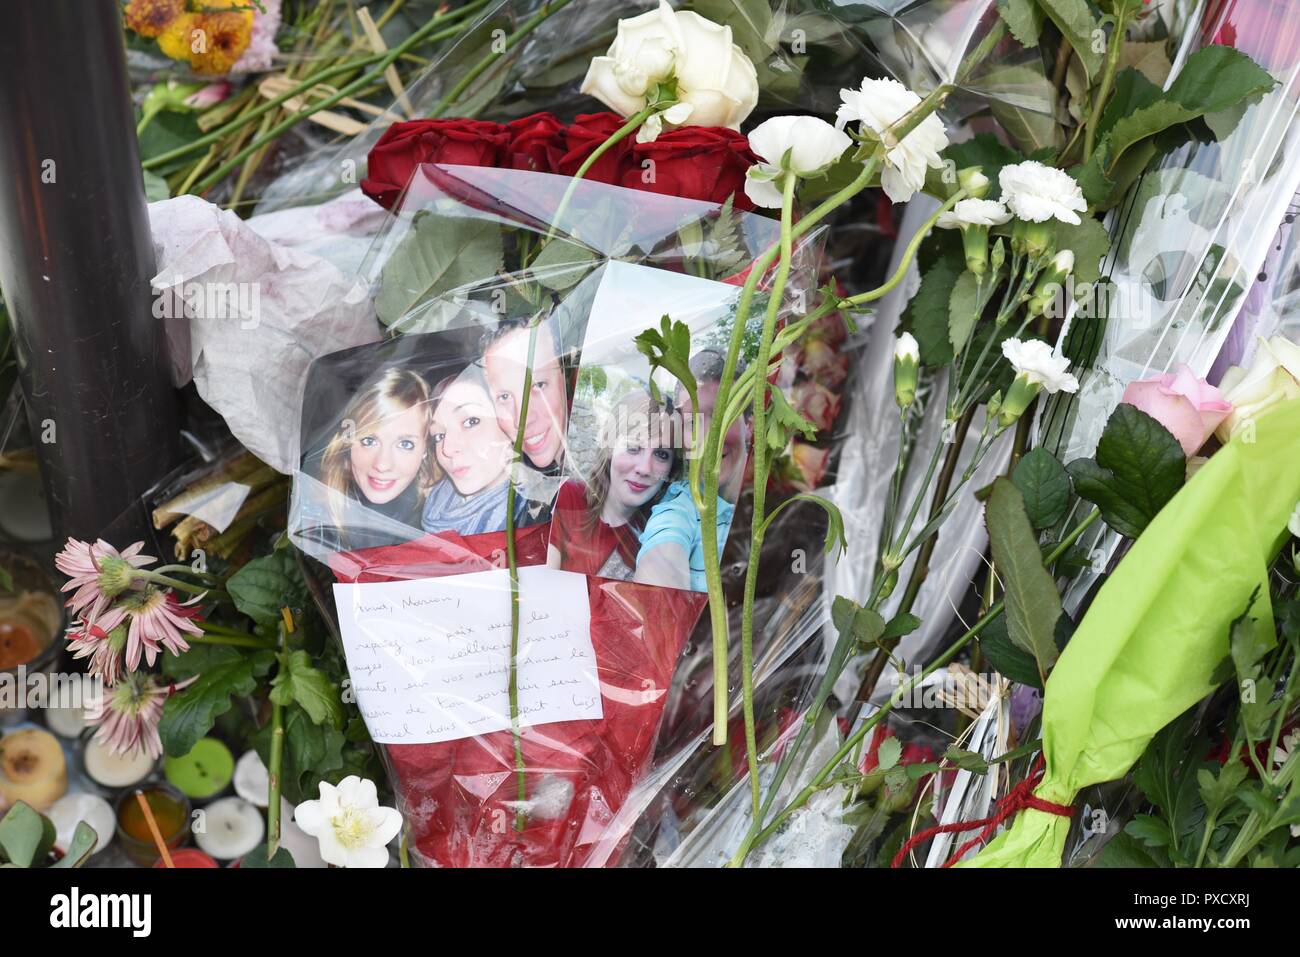 November 22, 2015 - Paris, France: People pay tribute to the victims of the November 13 terror attacks with candles, drawings, street arts, and pictures of the dead with impromptu memorial near the Carillon bar and the Petit Cambodge restaurant. Des photos des victimes des attaques terroristes du 13 novembre 2015 sont posees au milieu de fleurs le long d'un memorial improvise pres du bar Le Carillon. *** FRANCE OUT / NO SALES TO FRENCH MEDIA *** Stock Photo